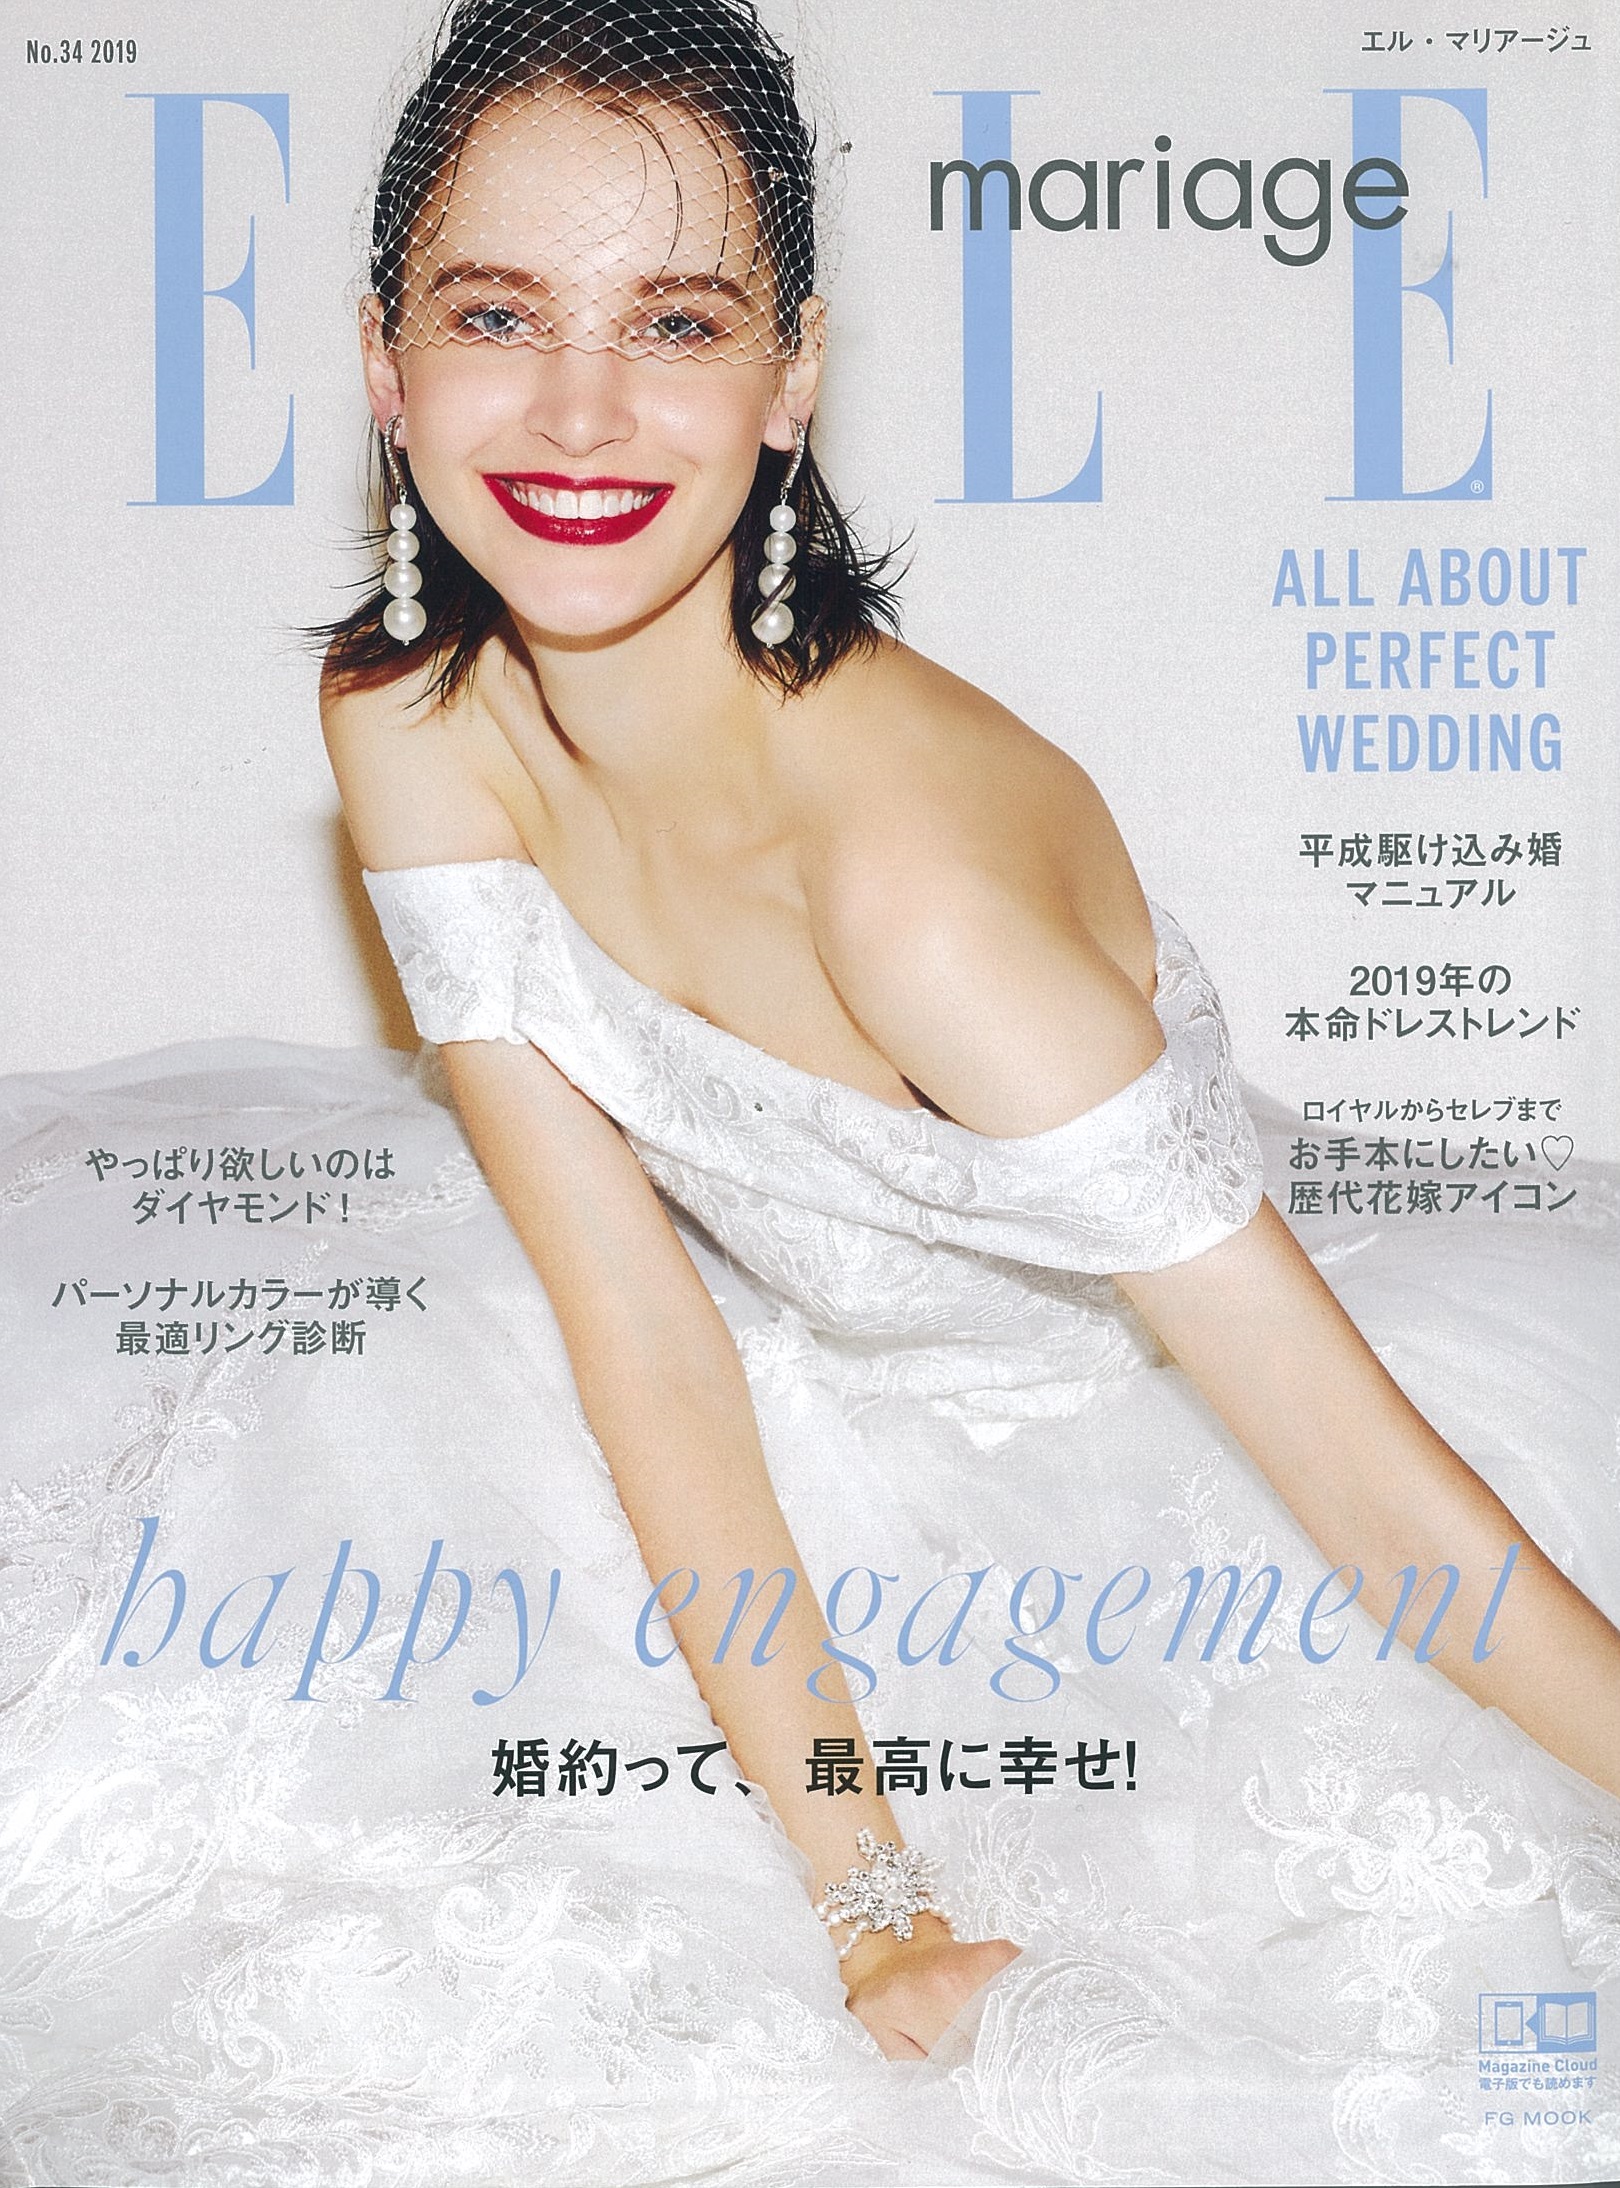 ELLE mariage No.34 2019 | トピックス | THE SWEET COLLECTION